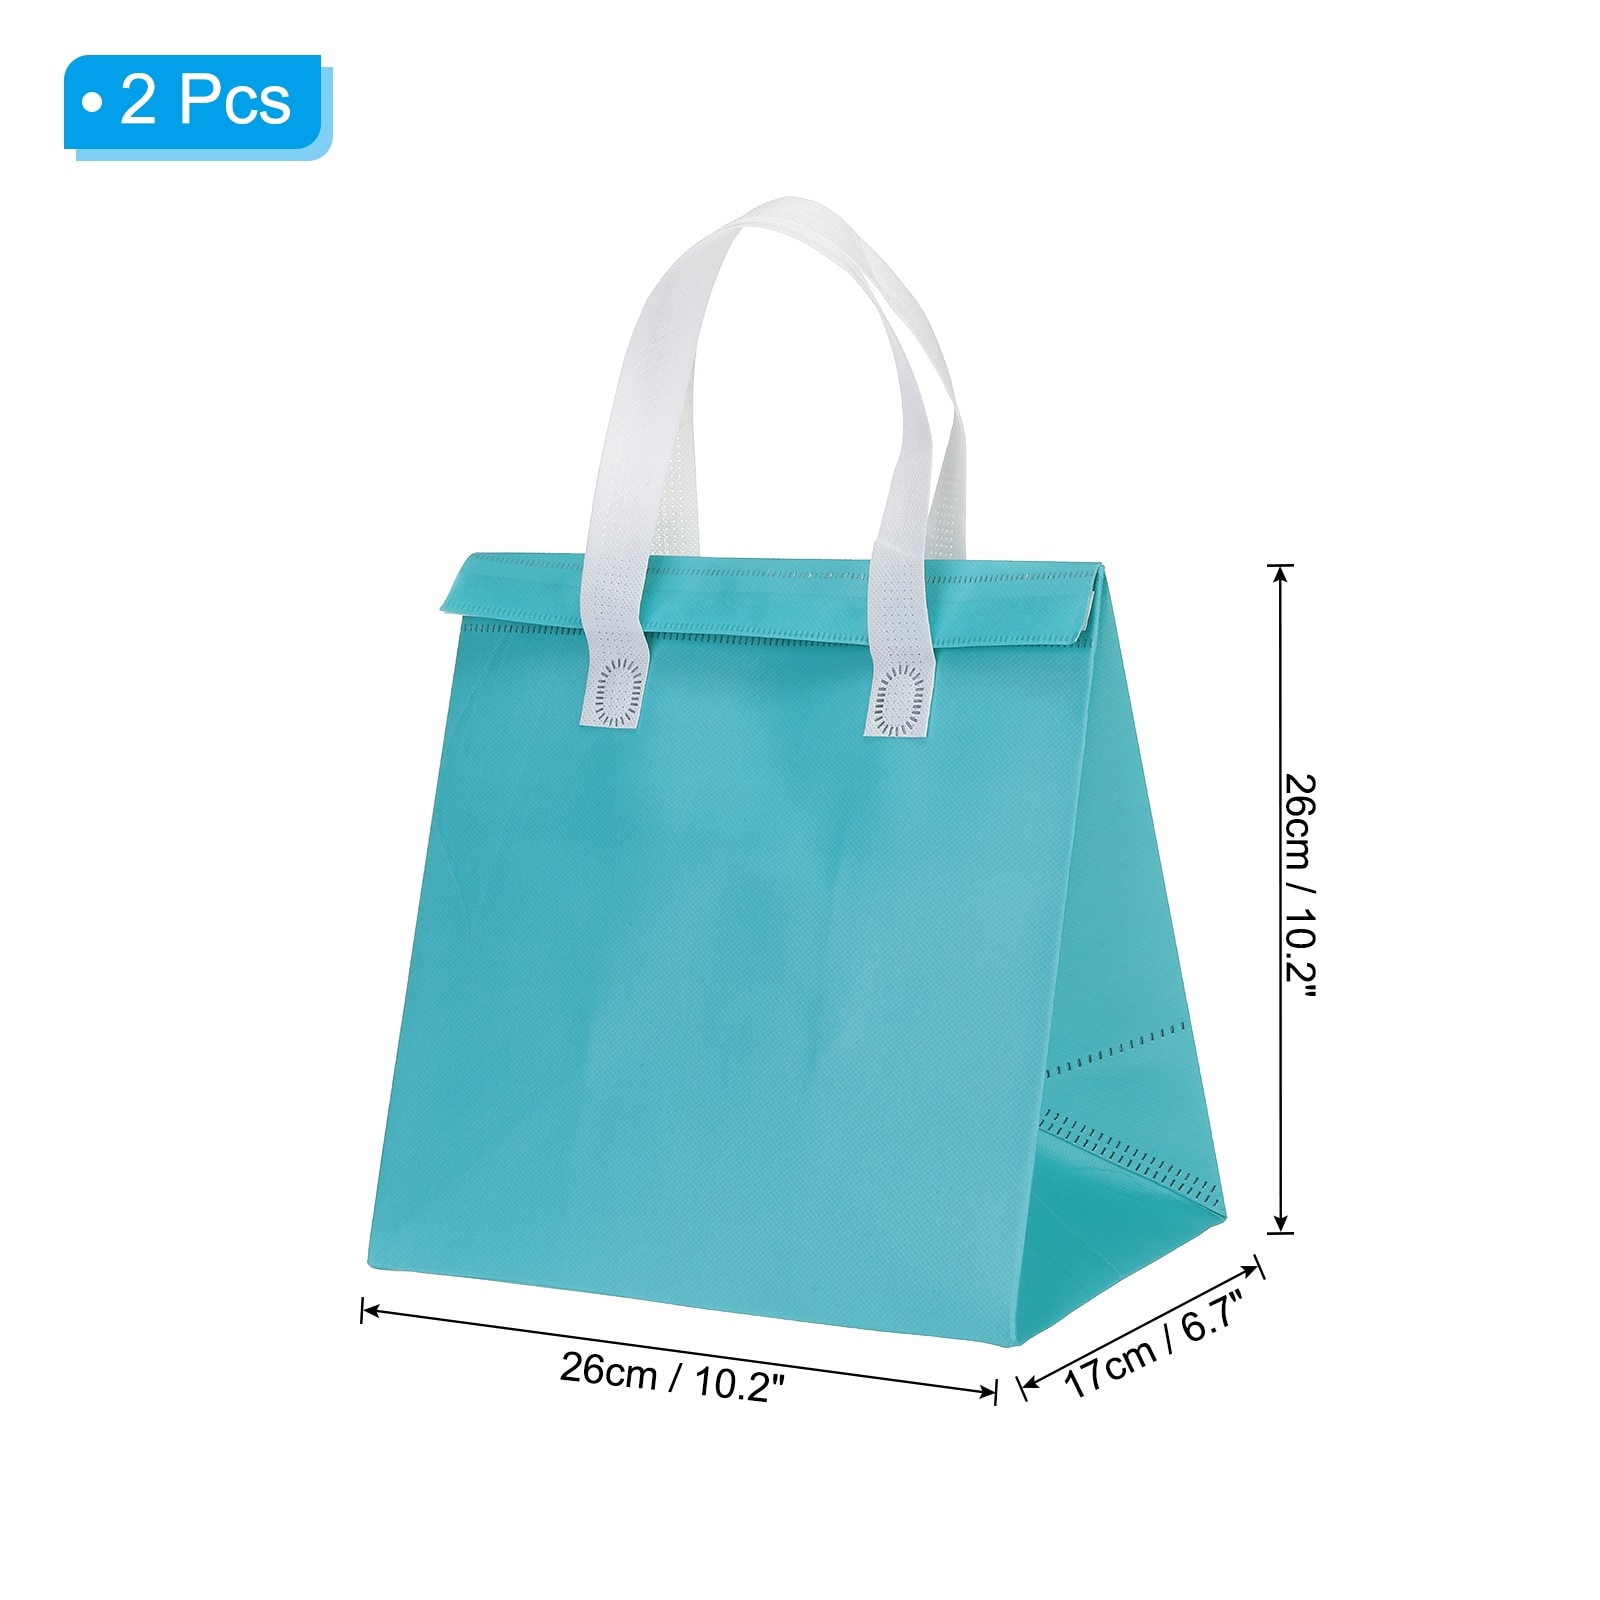 2pcs Insulated Lunch Bag, Leakproof Lunch Tote Bag for Office